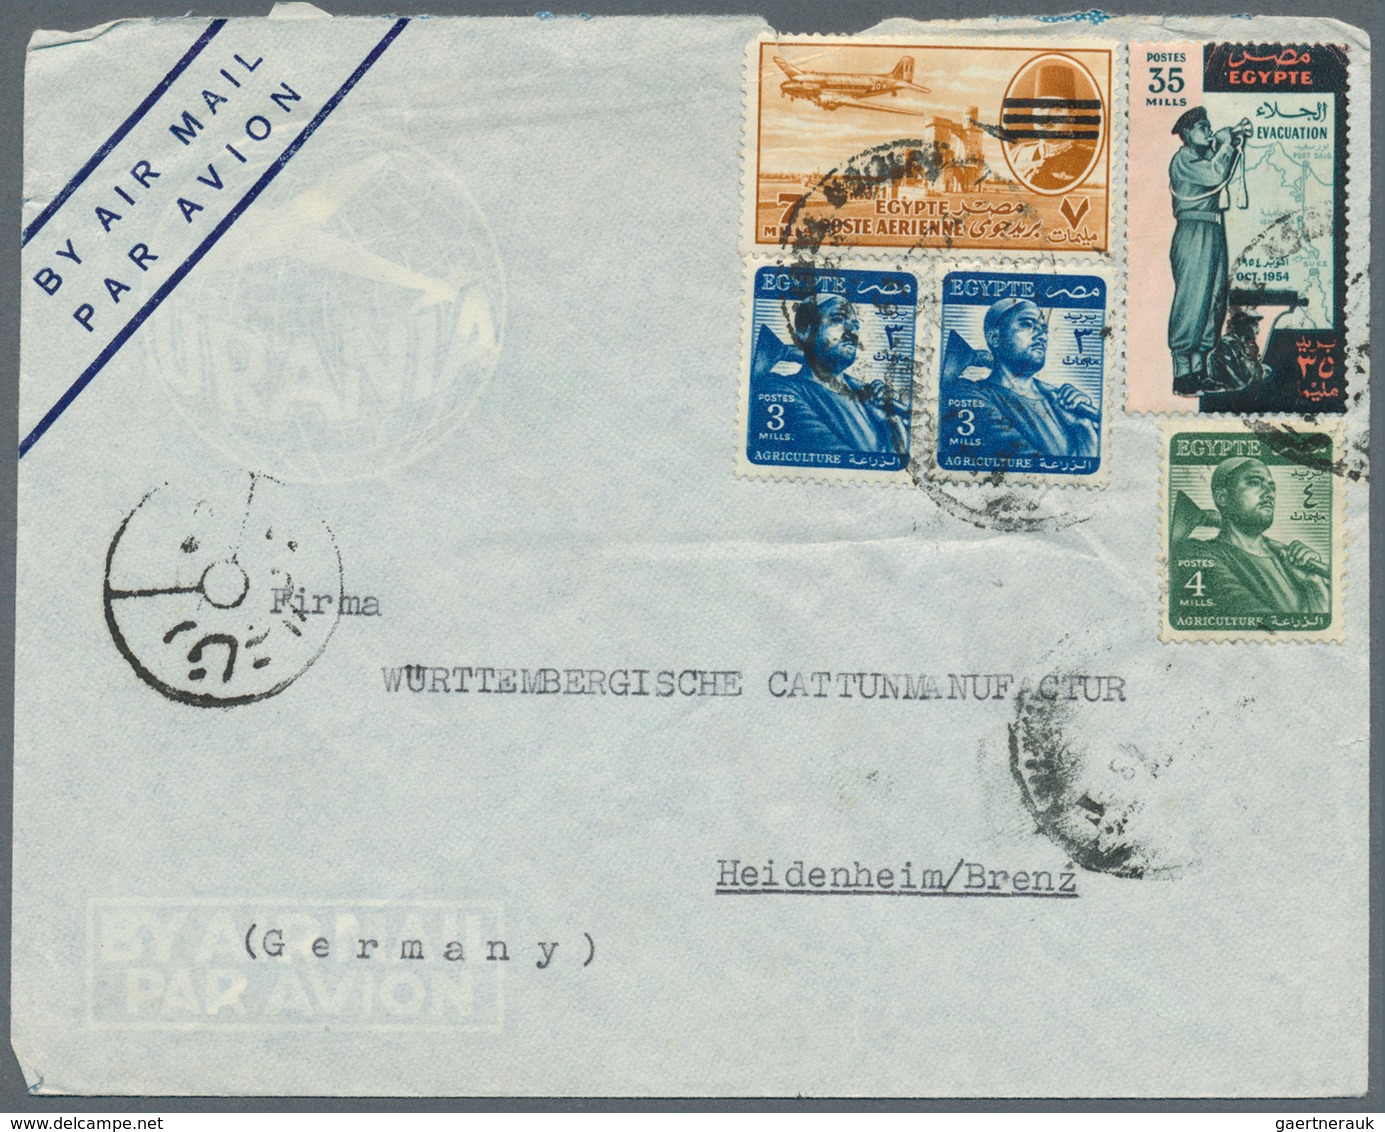 Ägypten: starting about 1900, cover lot of more than 400 covers many to Germany or GDR, some interna